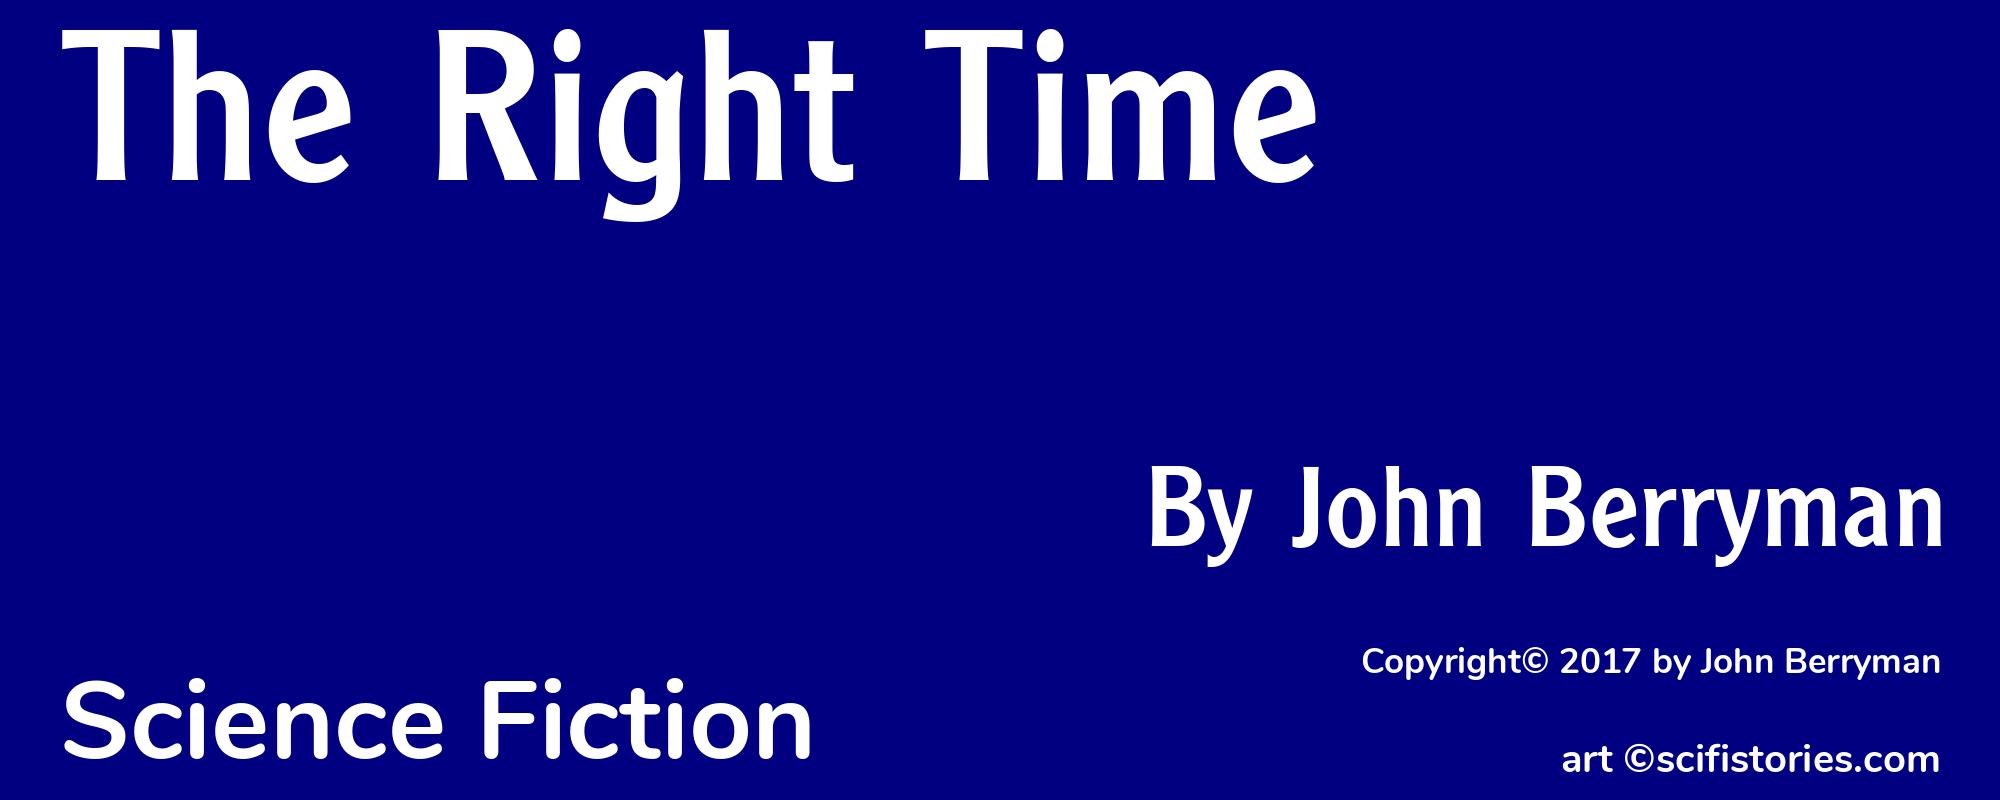 The Right Time - Cover